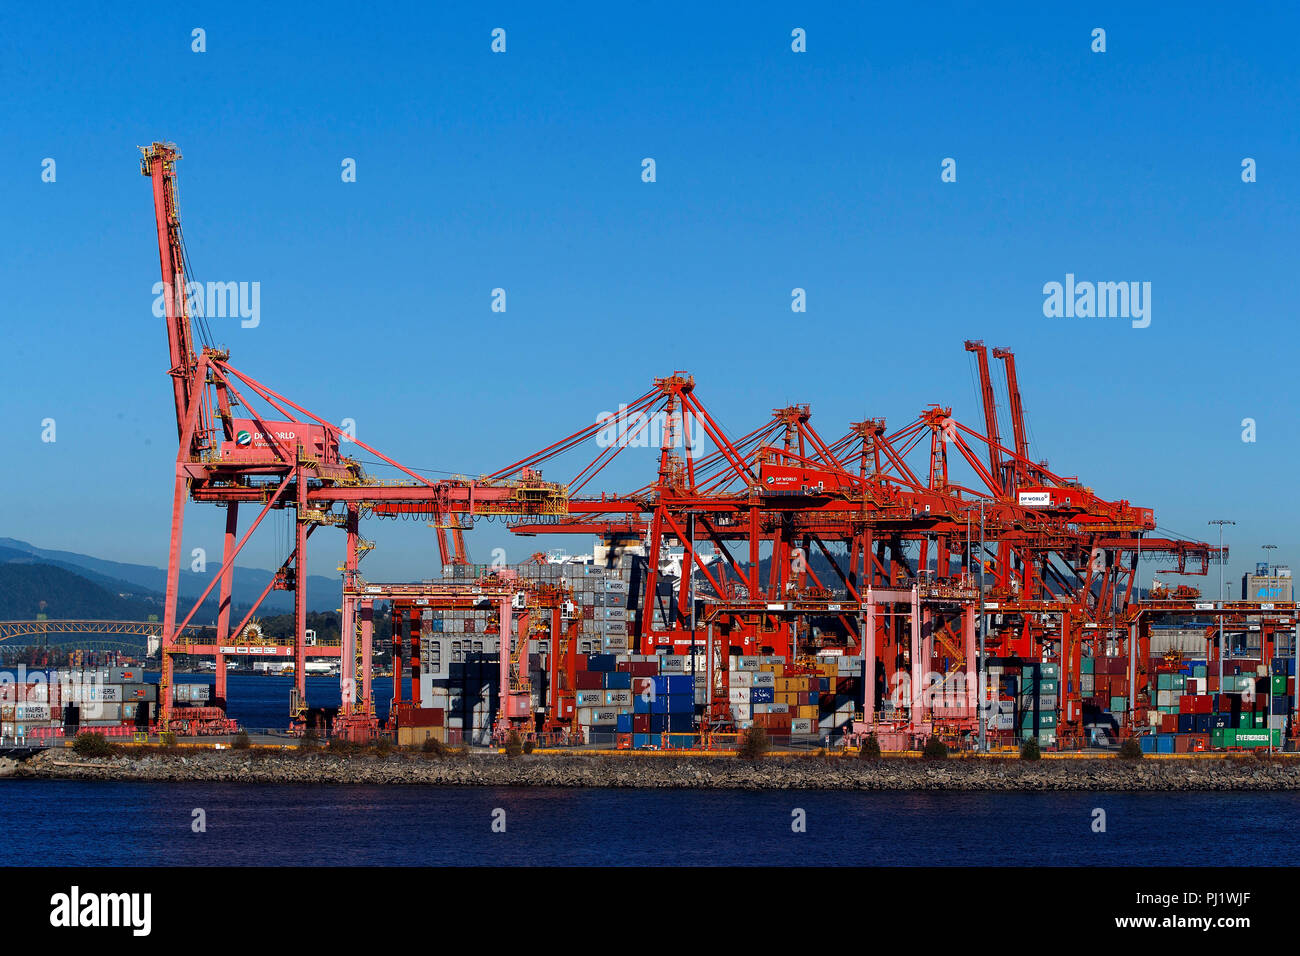 Container cranes and machinery, Port of Vancouver, Vancouver Harbor, Vancouver, British Columbia, Canada Stock Photo